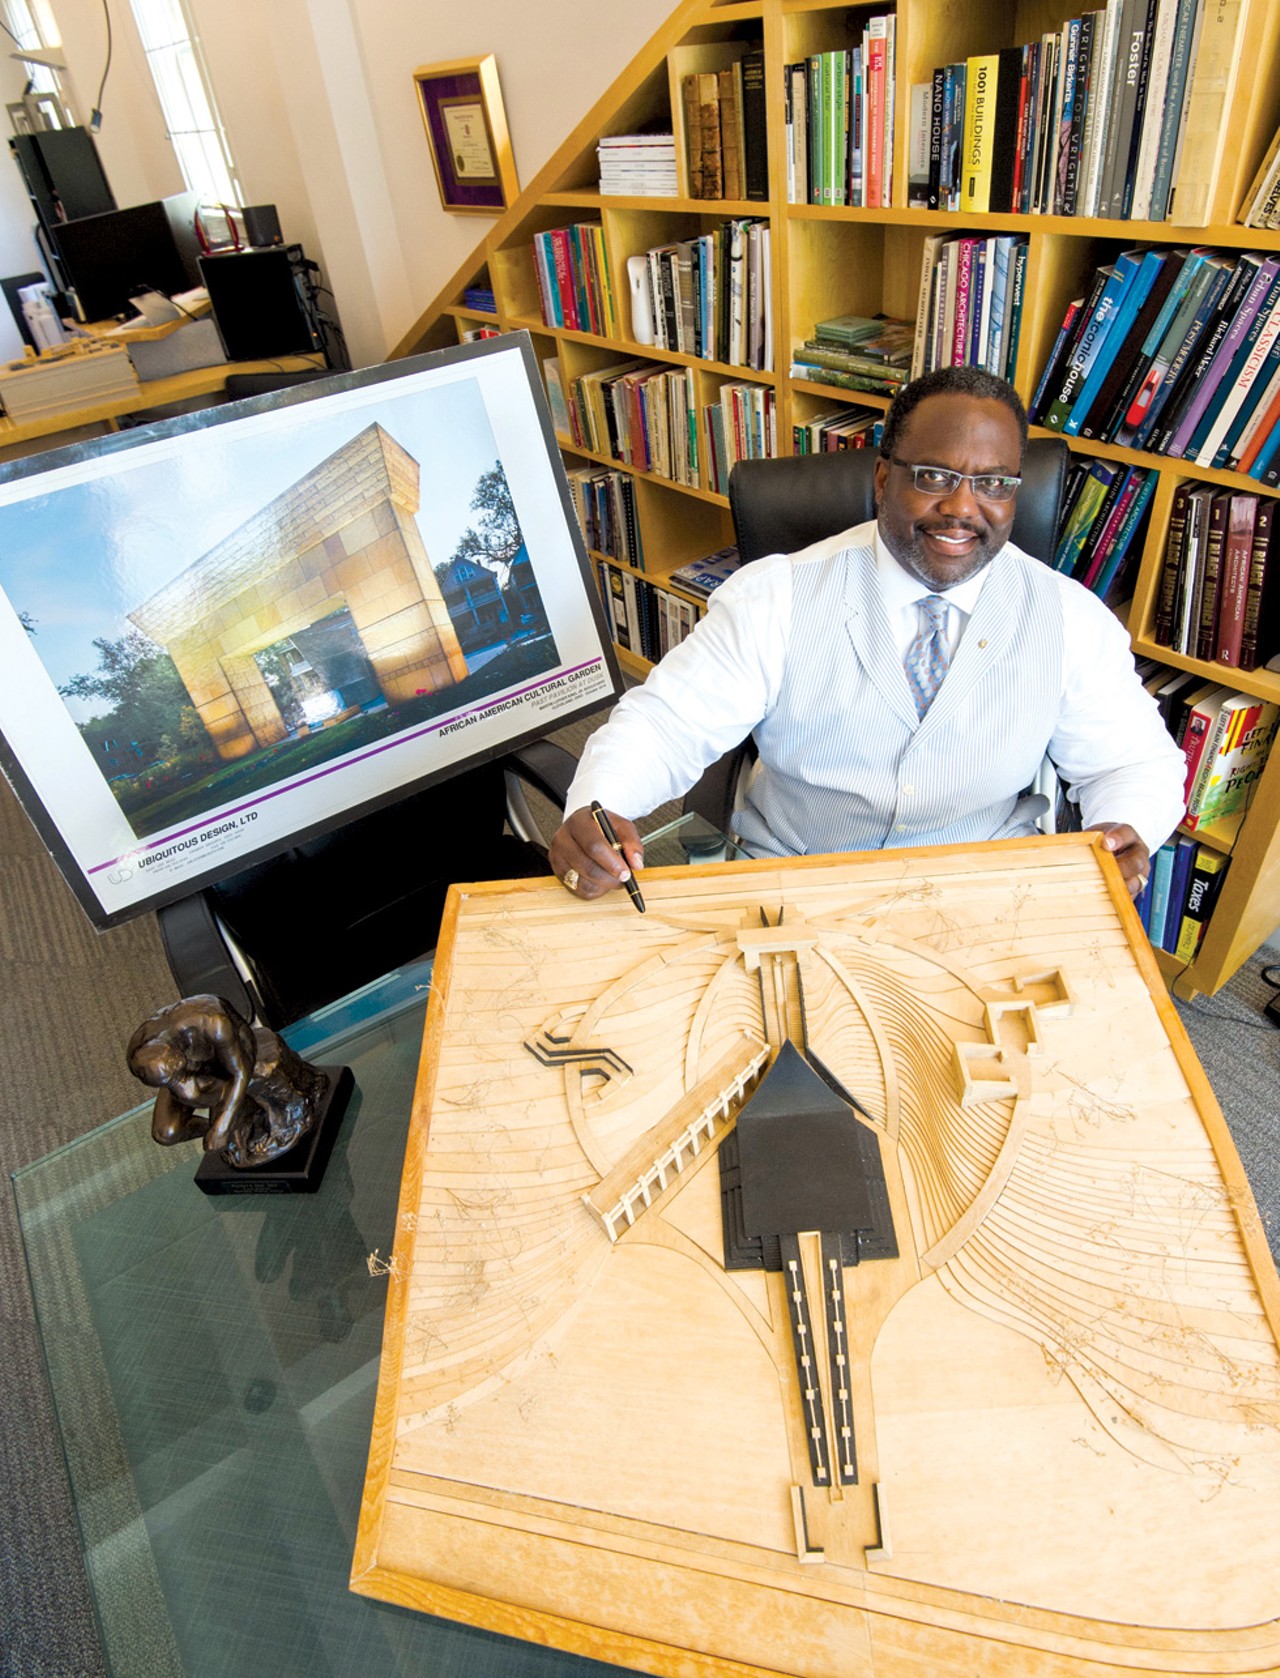 W. Daniel Bickerstaff
Principal, Ubiquitous Design, LTD
When architect Daniel Bickerstaff realized, with a start, that he wasn't just on the design subcommittee for the African-American Cultural Garden, he was in charge of spearheading the design, he went six months without picking up a pencil.
"That's unheard of for me," says the Shaker Heights resident, speaking at a conference table in his firm's office on Lee Road. "But I really wanted to understand this dual citizenship &mdash; this idea of being both African and American &mdash; before I put my ideas down."
Bickerstaff says during his extensive research of the harrowing Middle Passage and the experience of African-Americans in the United States, he would often find himself weeping at his computer screen.
"I'm a big guy, 285 pounds," says Bickerstaff, "but it was that emotional."
Bickerstaff, whose father is from Alabama, says he never discussed race with his family but that he sees the importance &mdash; no, the necessity &mdash; of doing so. "Just like our Jewish brothers and sisters," he says, "this country must embrace and express our history, even the awful parts. In doing so, we pay respect to those who survived. That's why I'm sitting here in this air-conditioned office."
Bickerstaff grew up in Hough (the 8200 block of Superior) and attended Cleveland public schools until the 10th grade, when he won a scholarship and finished high school in Boston. Afterward, he attended Washington University in St. Louis to study architecture, in defiance of a prominent professor who encouraged him to switch to social work. Energized, and proud of his academic accomplishments, he returned to Cleveland in 1986. After working in the private sector for a few years, he worked in the city's planning office. He was Mayor Michael White's chief architect before he set out on his own in 2002.
Since that time, his firm, Ubiquitous Design, LTD, has worked on an array of local projects. Bickerstaff has a passion for historic preservation and designed the Men's retail clothing store at Clifton Boulevard and Lake Avenue that used to be a BP gas station. He designed the red and metallic contemporary condos on Brayton Avenue in Tremont. He has designed churches and hotels and local parks.
(In case you're wondering &mdash; we couldn't resist asking &mdash; Bickerstaff's favorite building in Cleveland is the Terminal Tower. He worked there fresh out of college and has fond memories of, among other things, the fountain. He says he looks forward to what Tower City can be again, now that a sufficient downtown population exists to patronize the businesses there.)
But his crown jewel remains the cultural garden. Though only the $600,000 first phase of the $2.5 million project is complete, the finished portion is already an important symbol for Cleveland's African-American community. The garden was originally dedicated in 1977, but a committee to raise funds and build the memorial wasn't established until 2003.
The completed portion includes a large archway and a black corridor that signifies the Doorway of No Return in West Africa.
"These are torturous things we're representing," Bickerstaff says, of his concept, "but I wanted the design to be beautiful, to be elegant, and to be something we're proud of as a community."
Bickerstaff says the fundraising for the remaining phases is ongoing, and that he'll be involved until the final stone is laid.
"For me," he says, "it's a labor of love." &mdash; Sam Allard